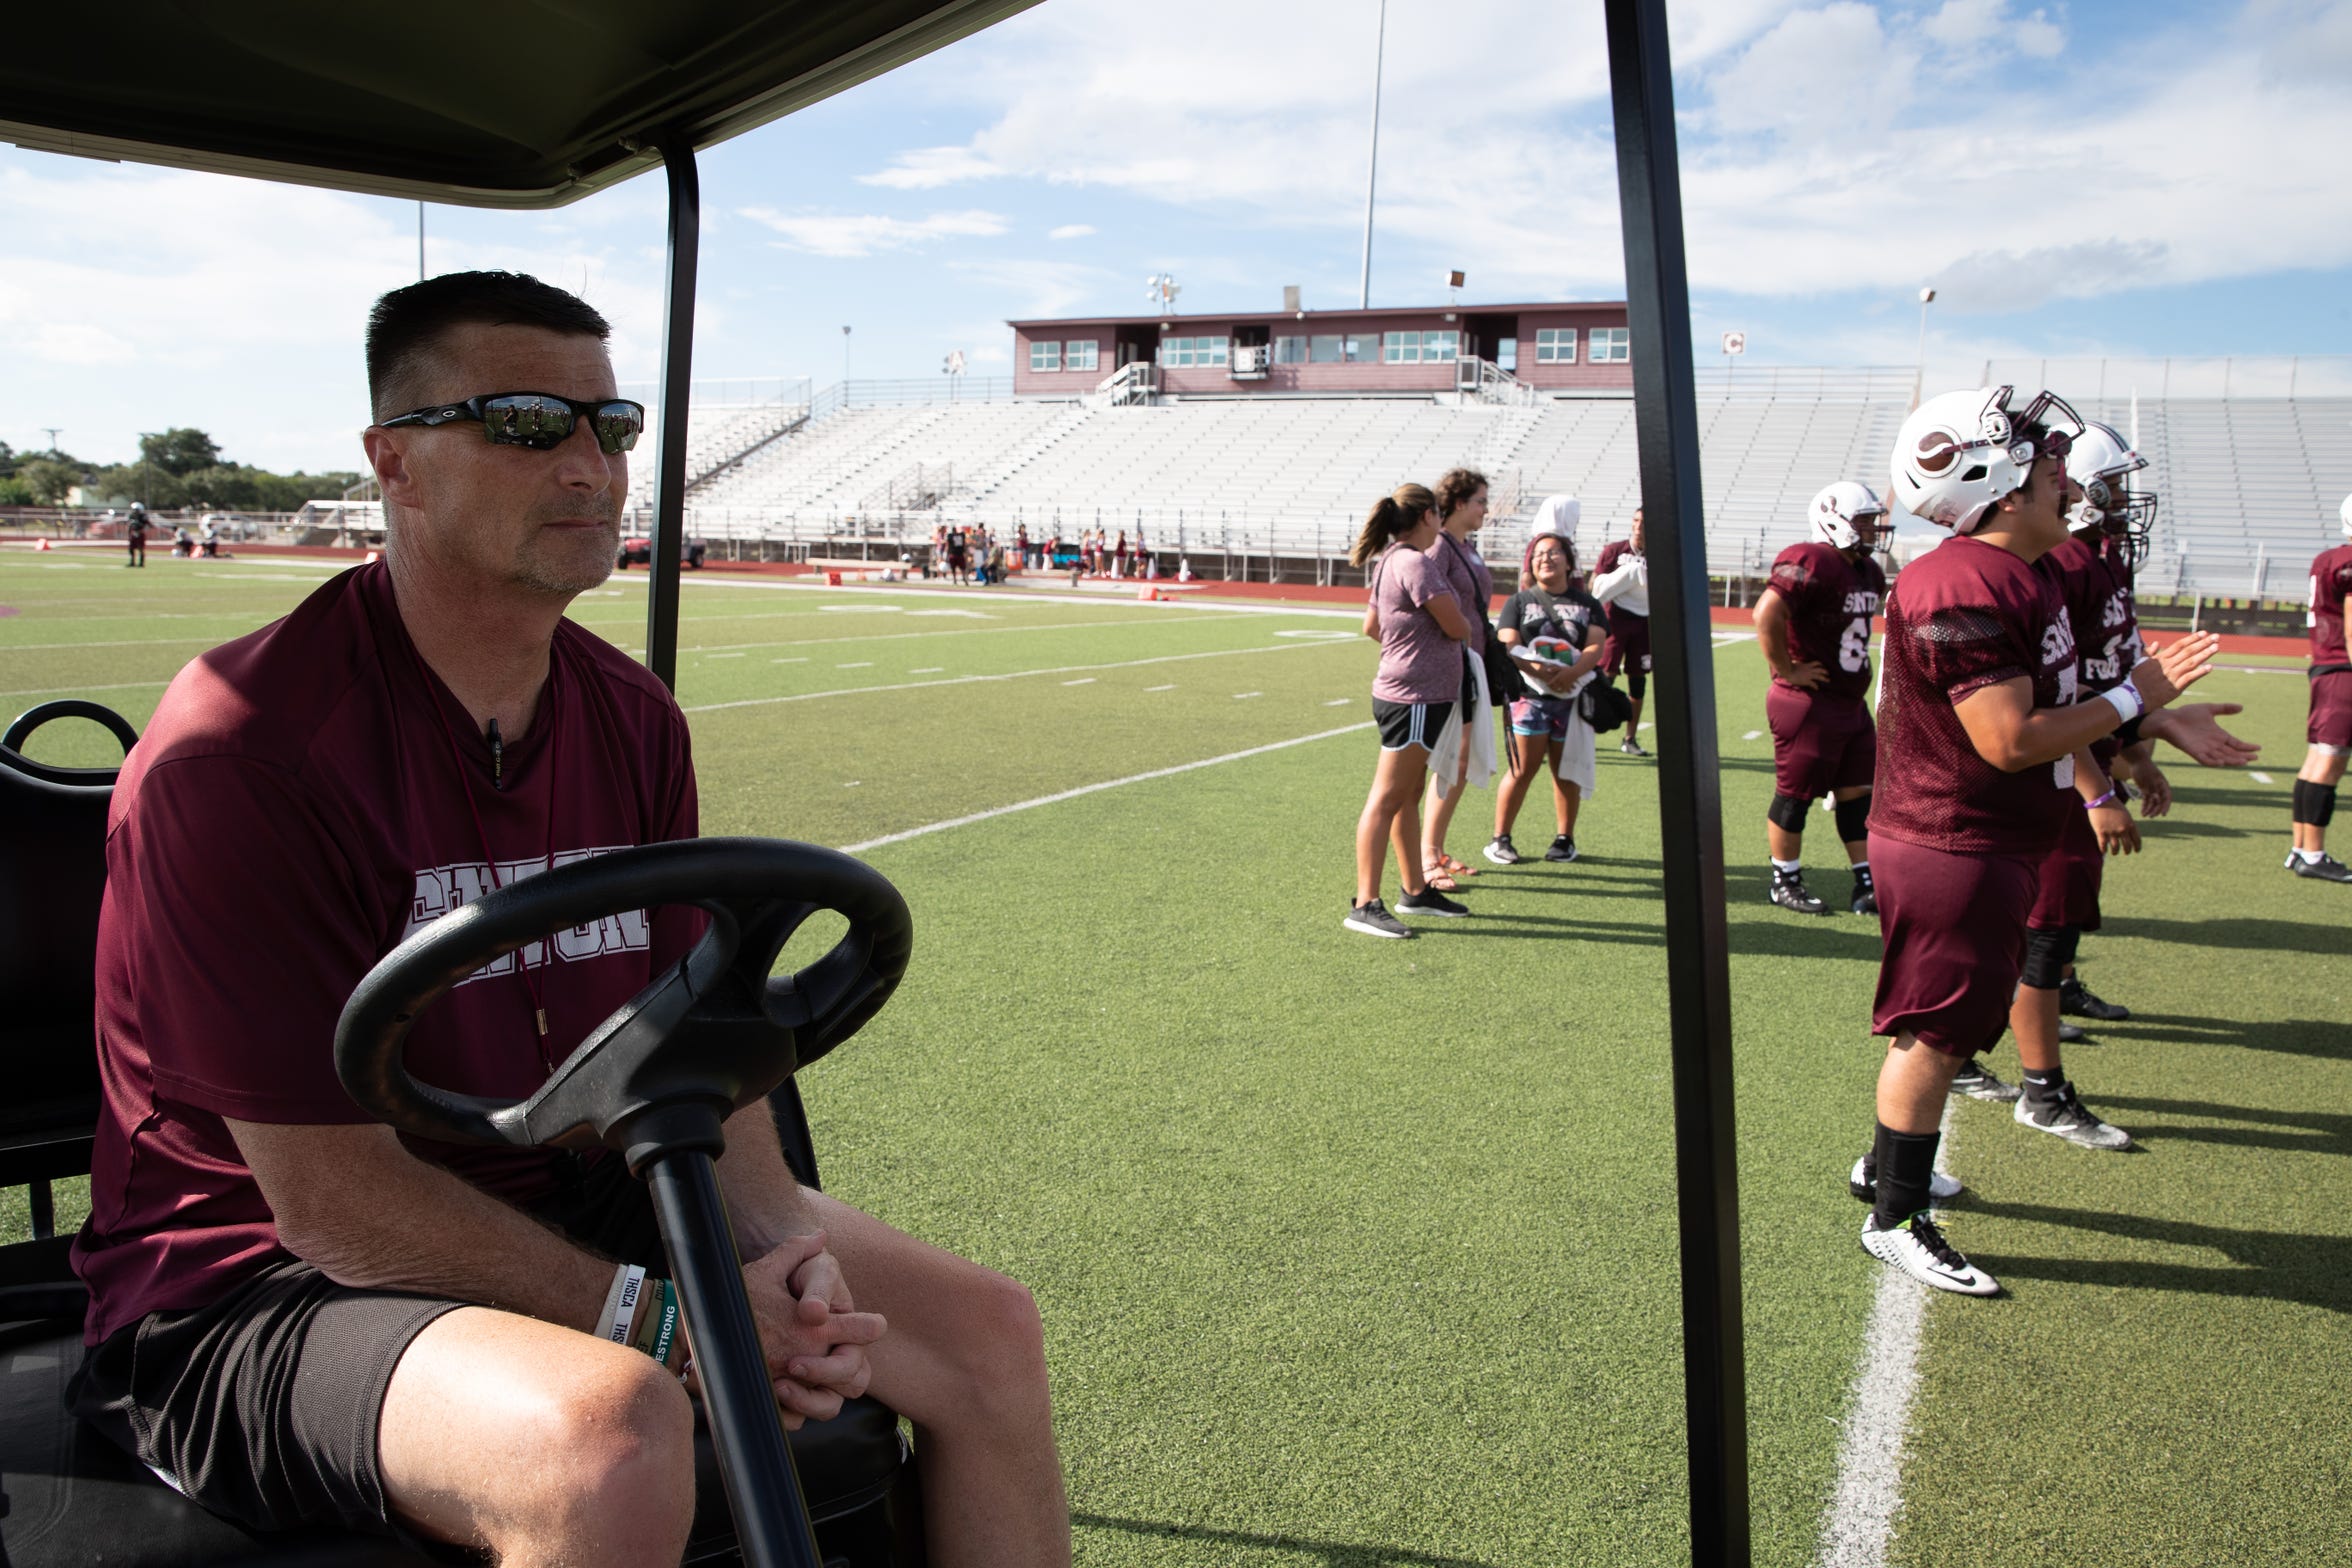 Tom Allen head coach of the Sinton football team watches from his cart as the team runs drills on the field during practice at Sinton High School on Tuesday, Sept. 18, 2018. Allen is suffering from a rare neurological disease that has him in a cart during games and practices